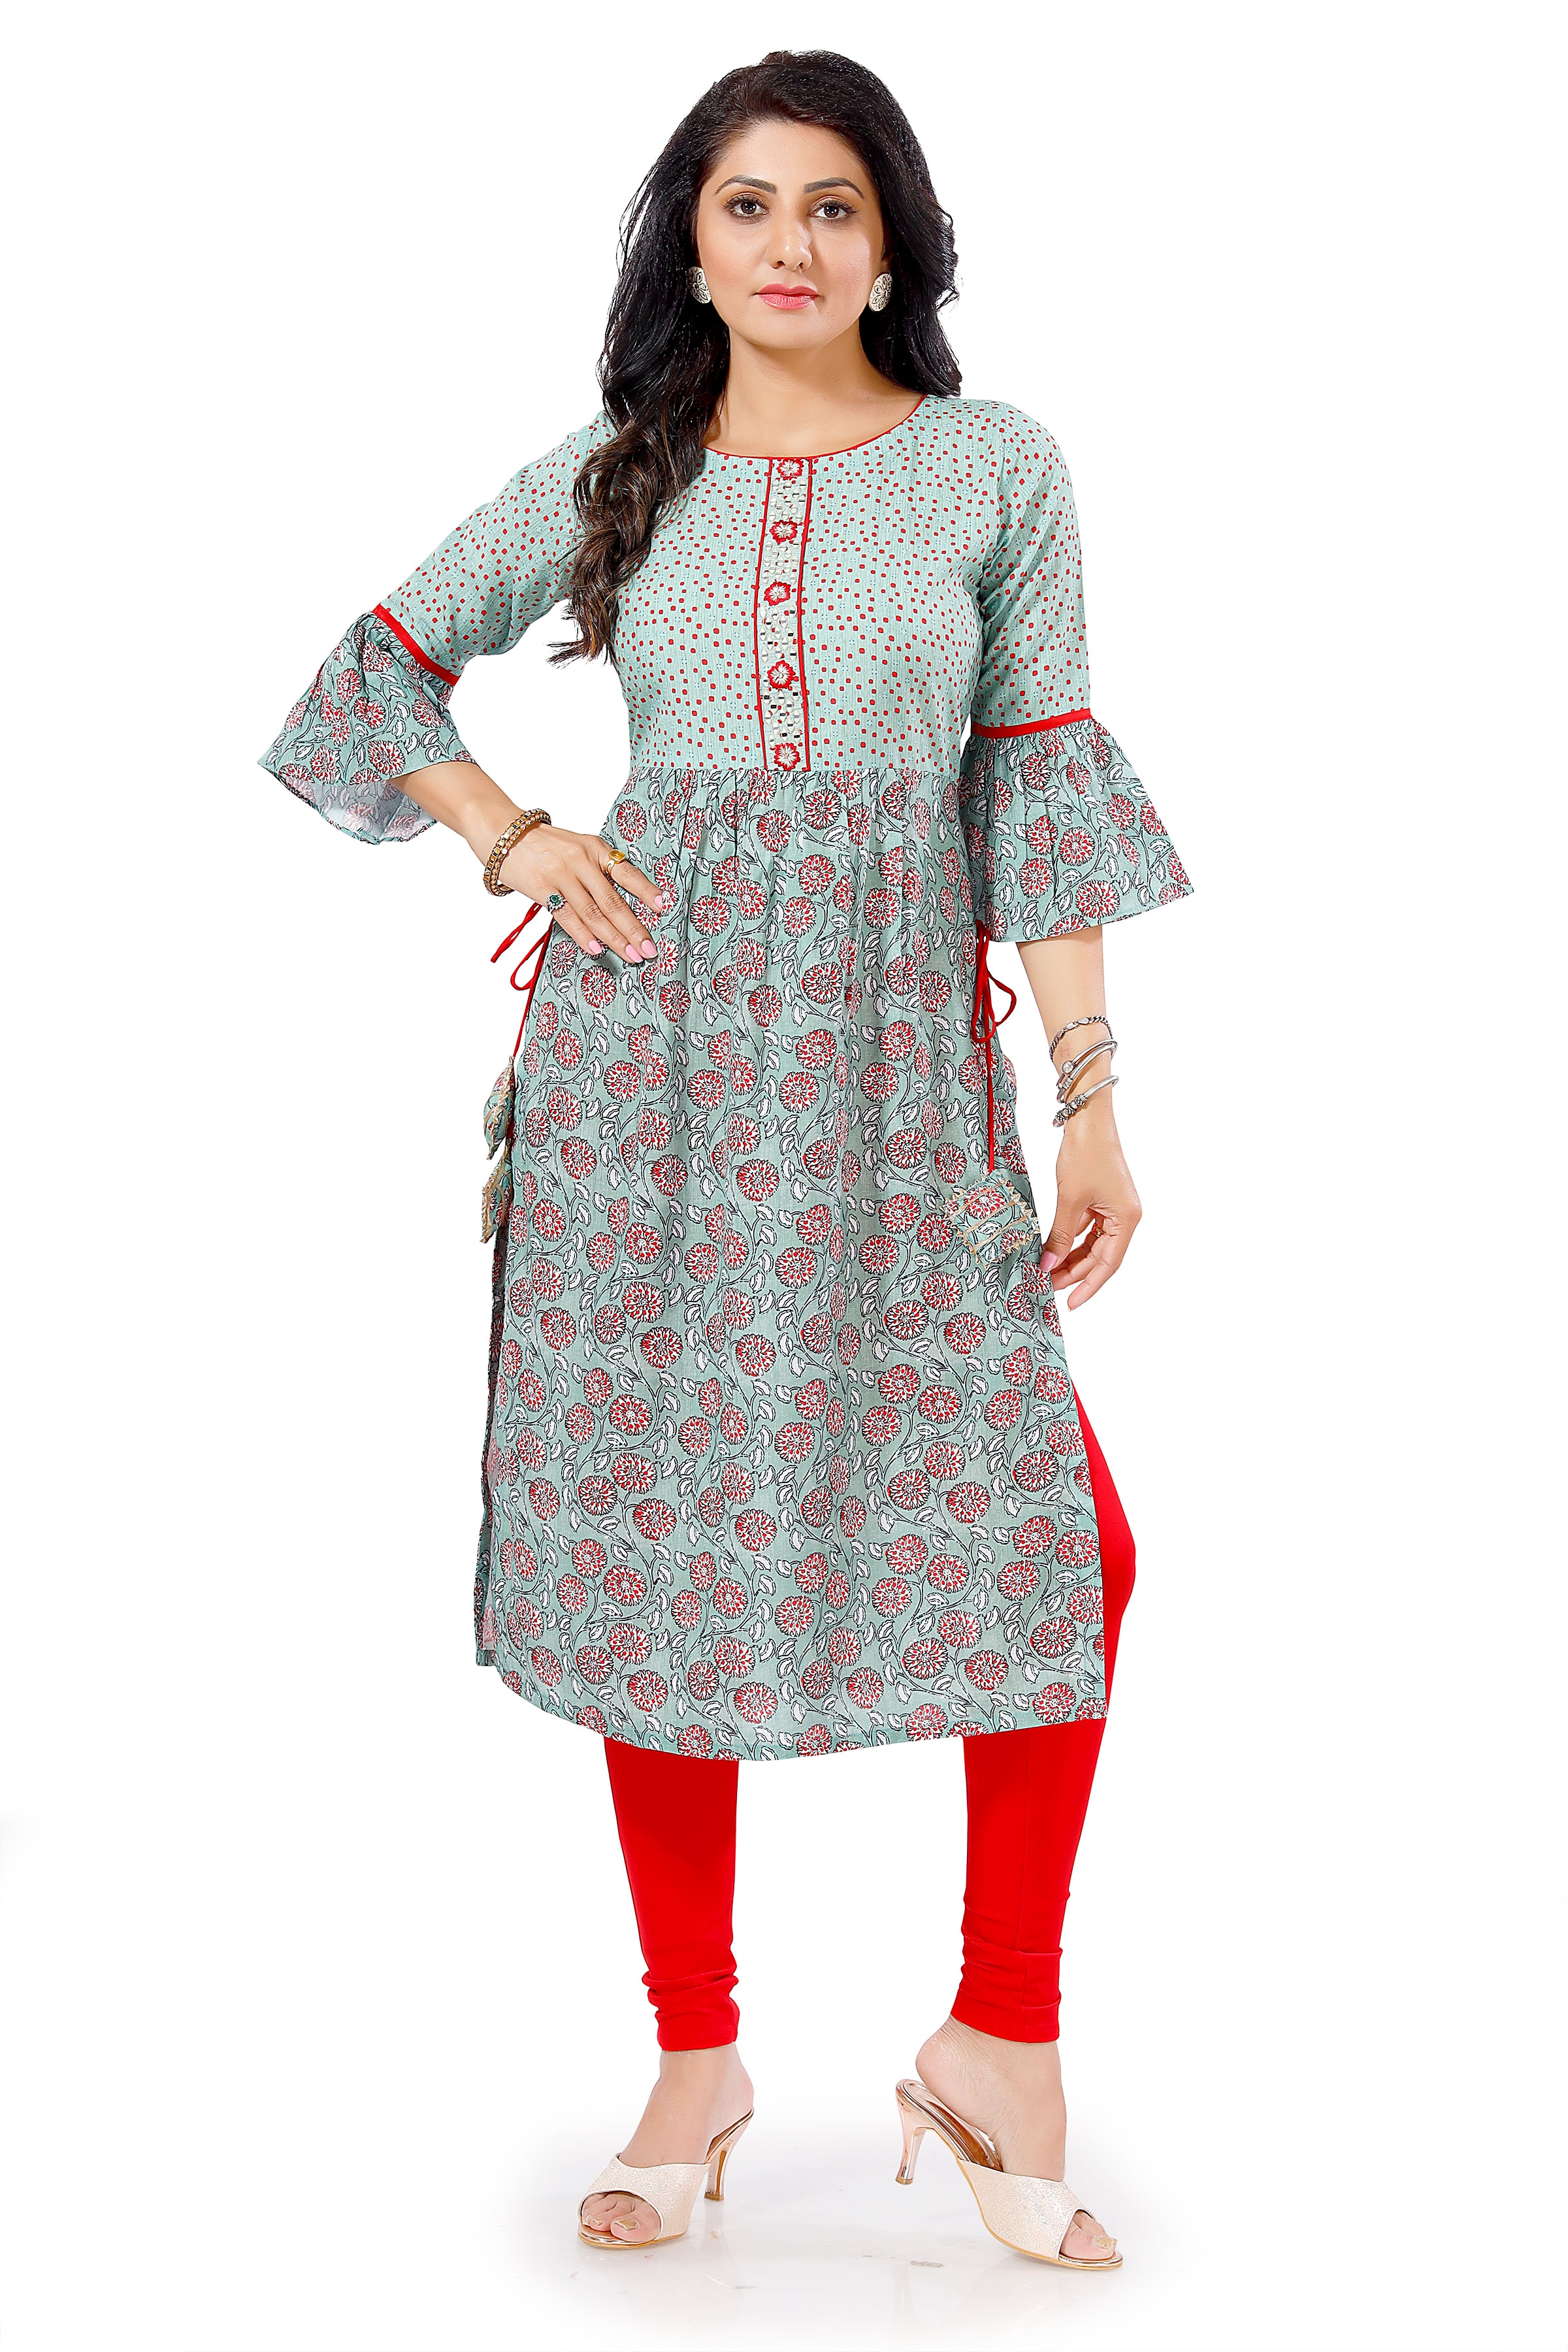 The Great indian sale Women's New Fashion Designer Fancy Wear Collection  Low Price Todays Best Special Offer Cotton Black Straight Plain Kurti :  Amazon.in: Fashion